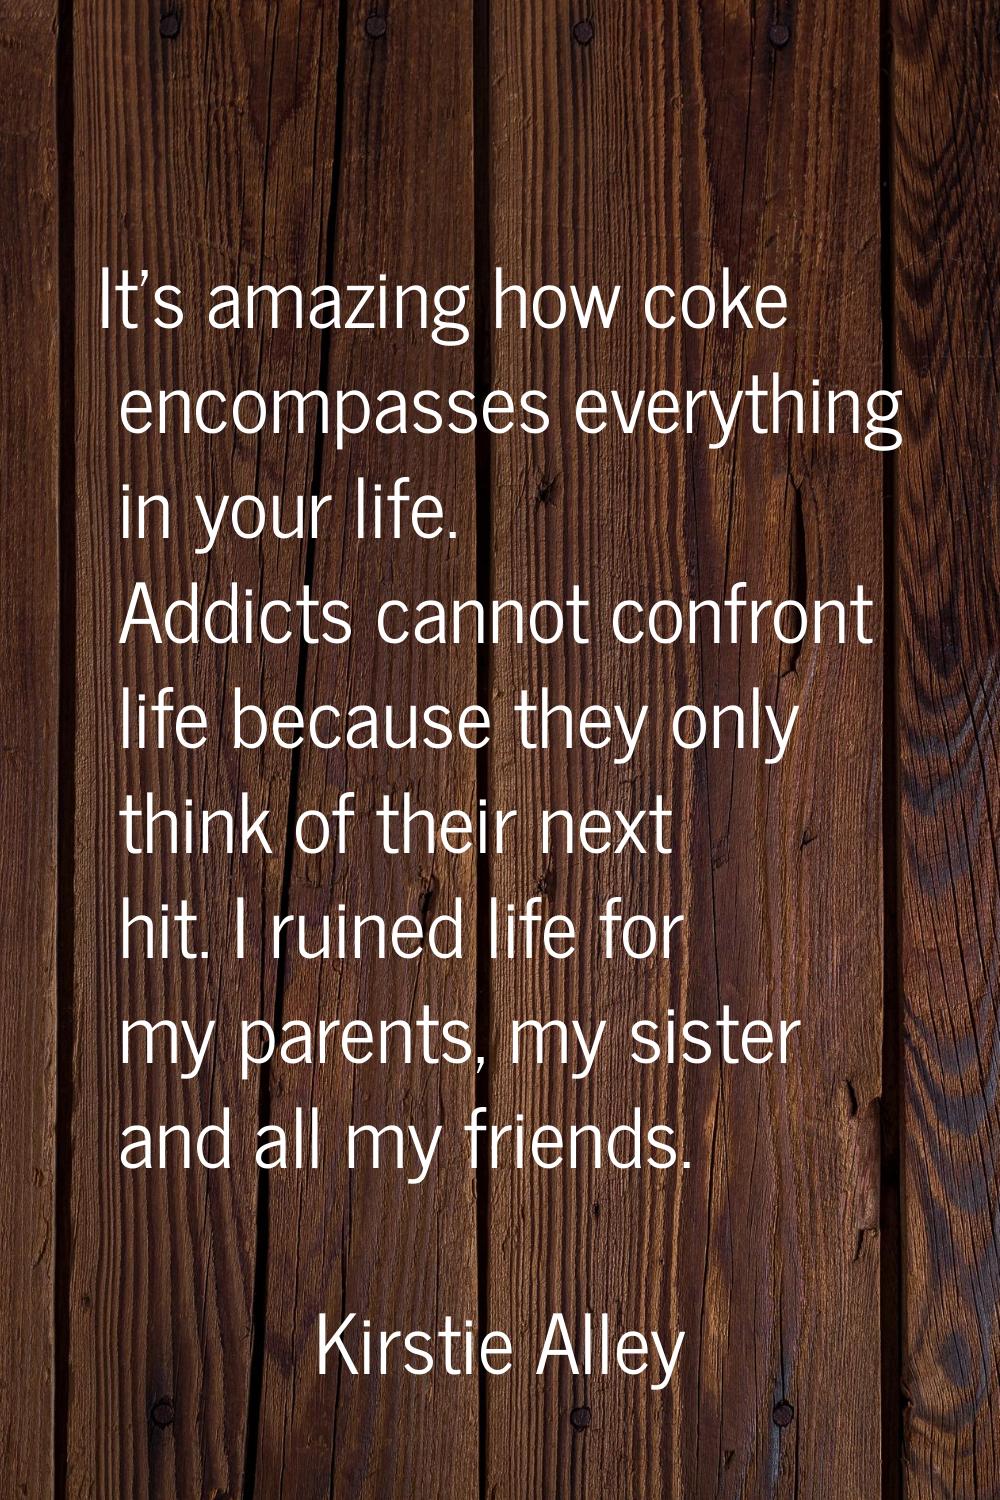 It's amazing how coke encompasses everything in your life. Addicts cannot confront life because the